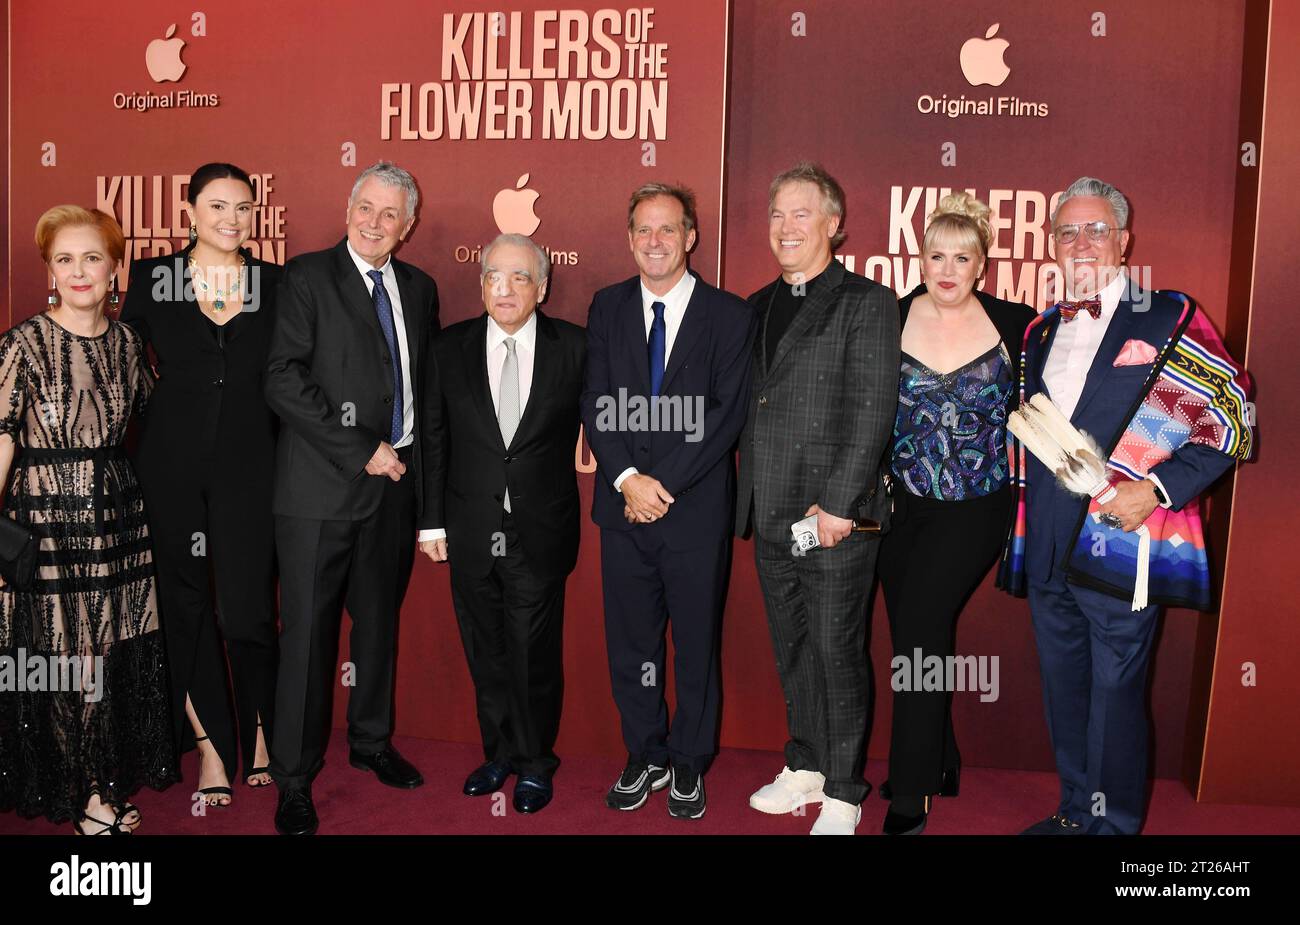 Los Angeles, California, USA. 16th Oct, 2023. (L-R) Marianne Bower, Justine Conte, Daniel Lupi, Martin Scorsese, Bradley Thomas, Rick Yorn and Lisa Frechette attend the Los Angeles Premiere of Apple TV 's 'Killer Of The Flower Moon' at the Dolby Theatre on October 16, 2023 in Los Angeles, California. Credit: Jeffrey Mayer/Jtm Photos/Media Punch/Alamy Live News Stock Photo